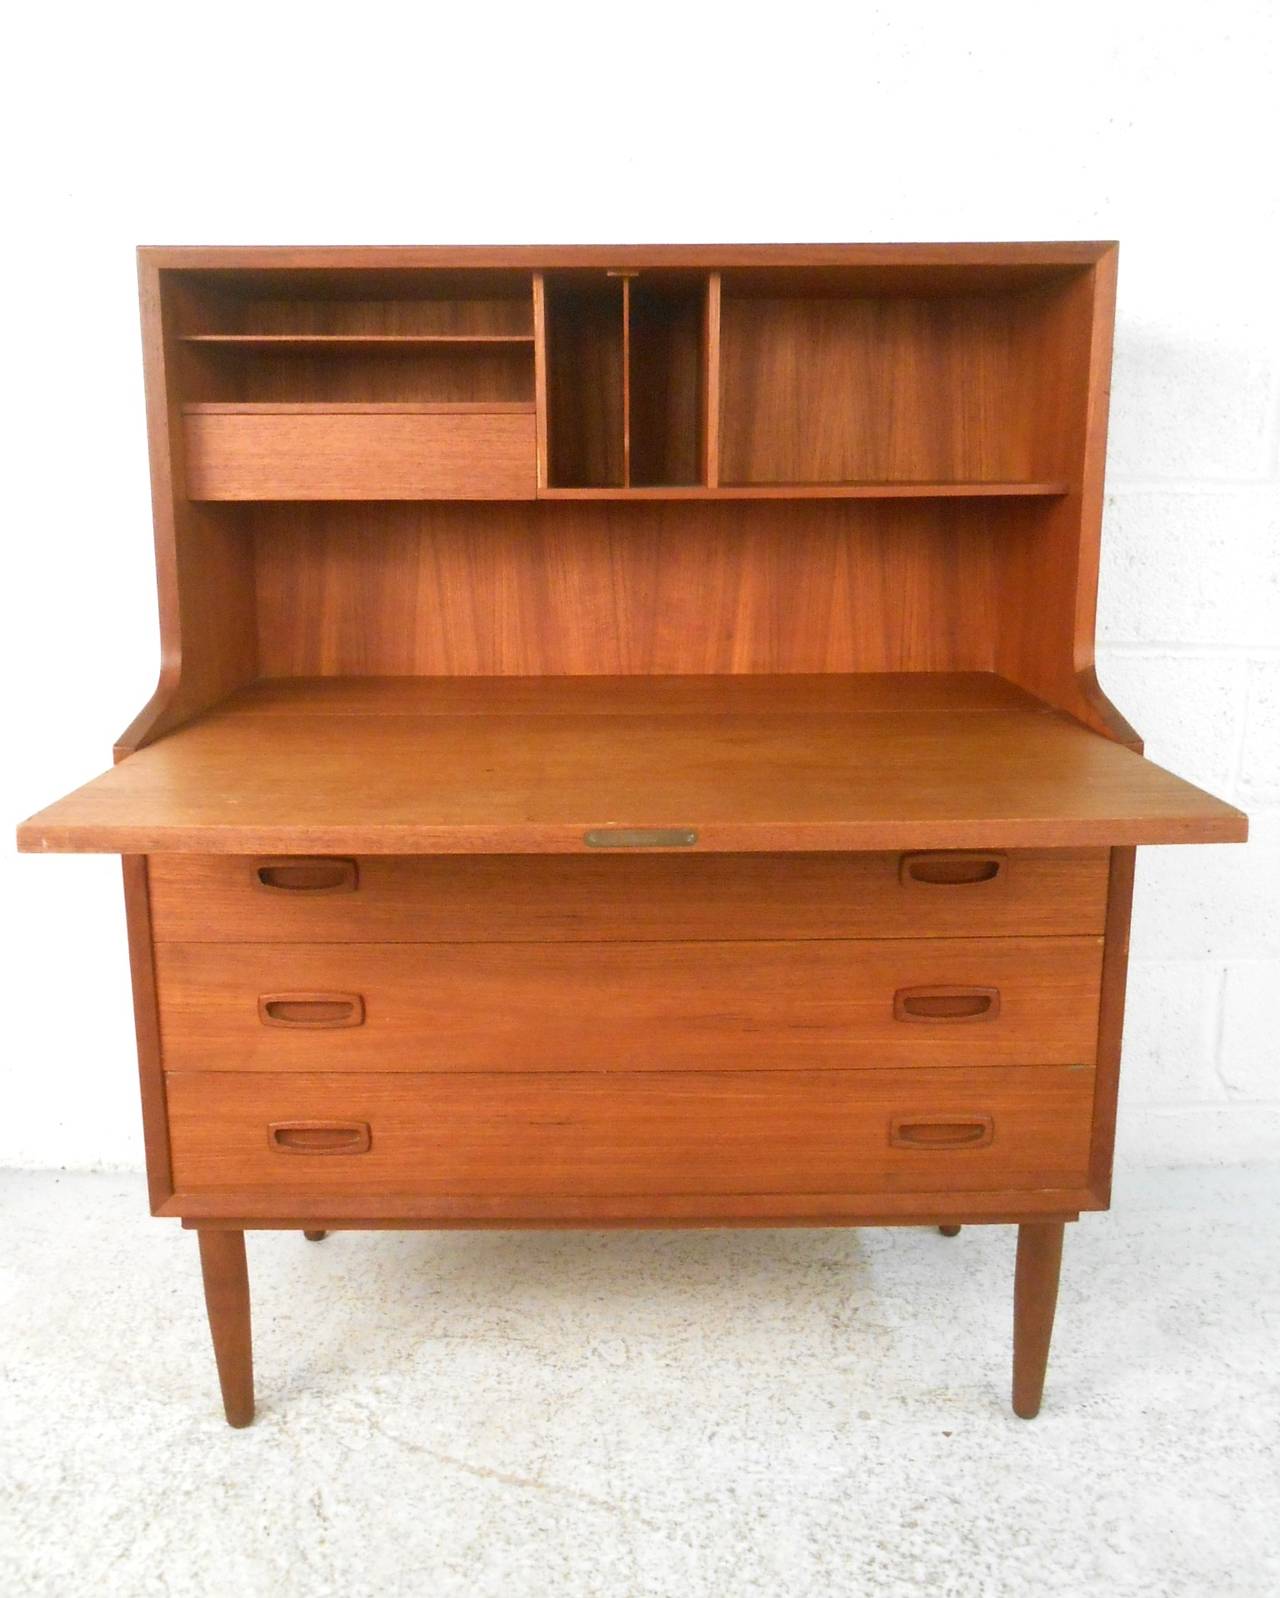 This teak drop front offers the perfect workspace for tight quarters, including three drawers for added storage and a desk top organization area. Tapered legs and carved drawer pulls add to it's Mid-Century charm. Please confirm item location (NY or